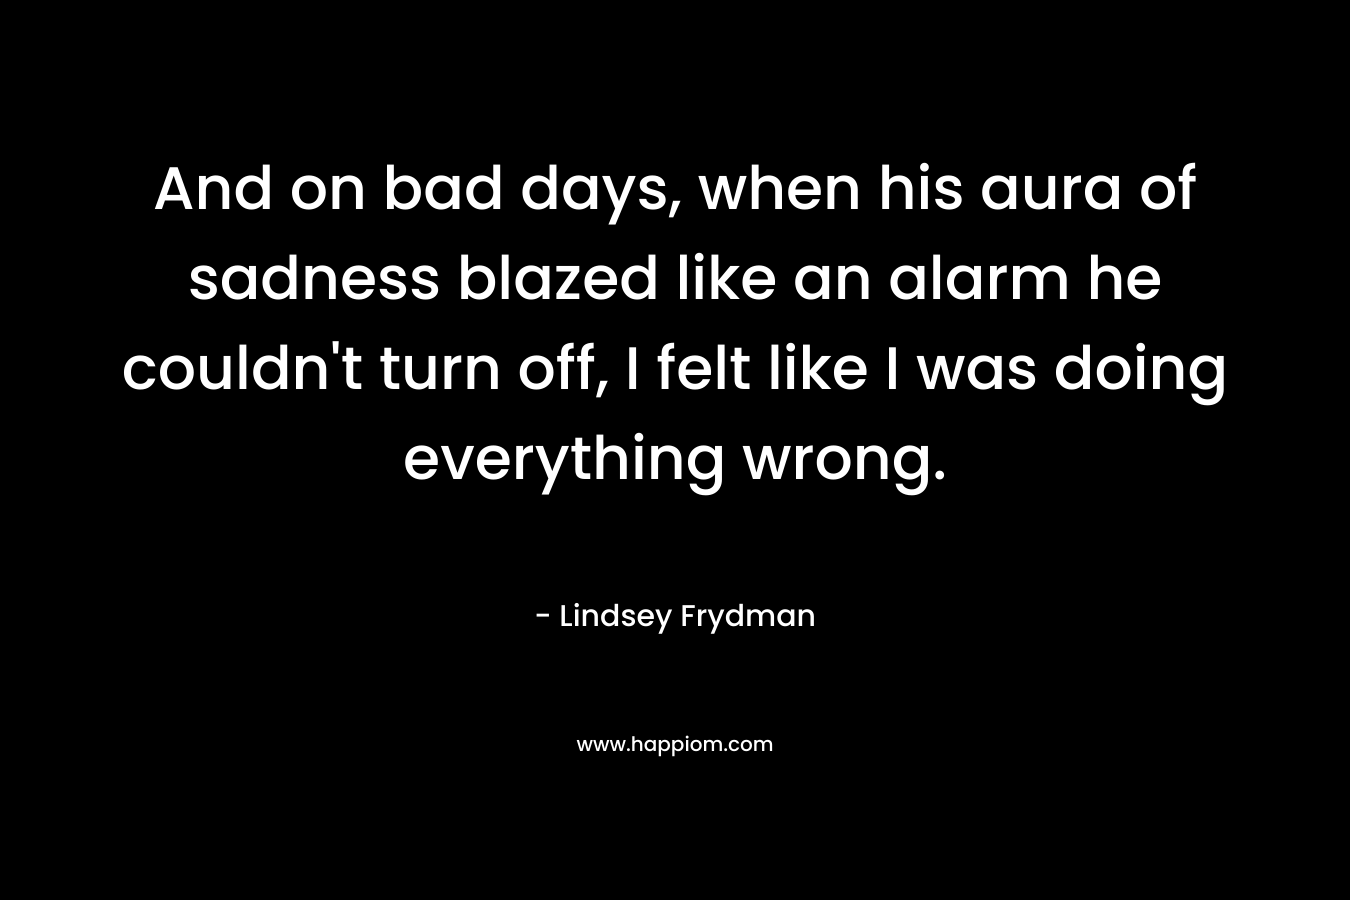 And on bad days, when his aura of sadness blazed like an alarm he couldn’t turn off, I felt like I was doing everything wrong. – Lindsey Frydman